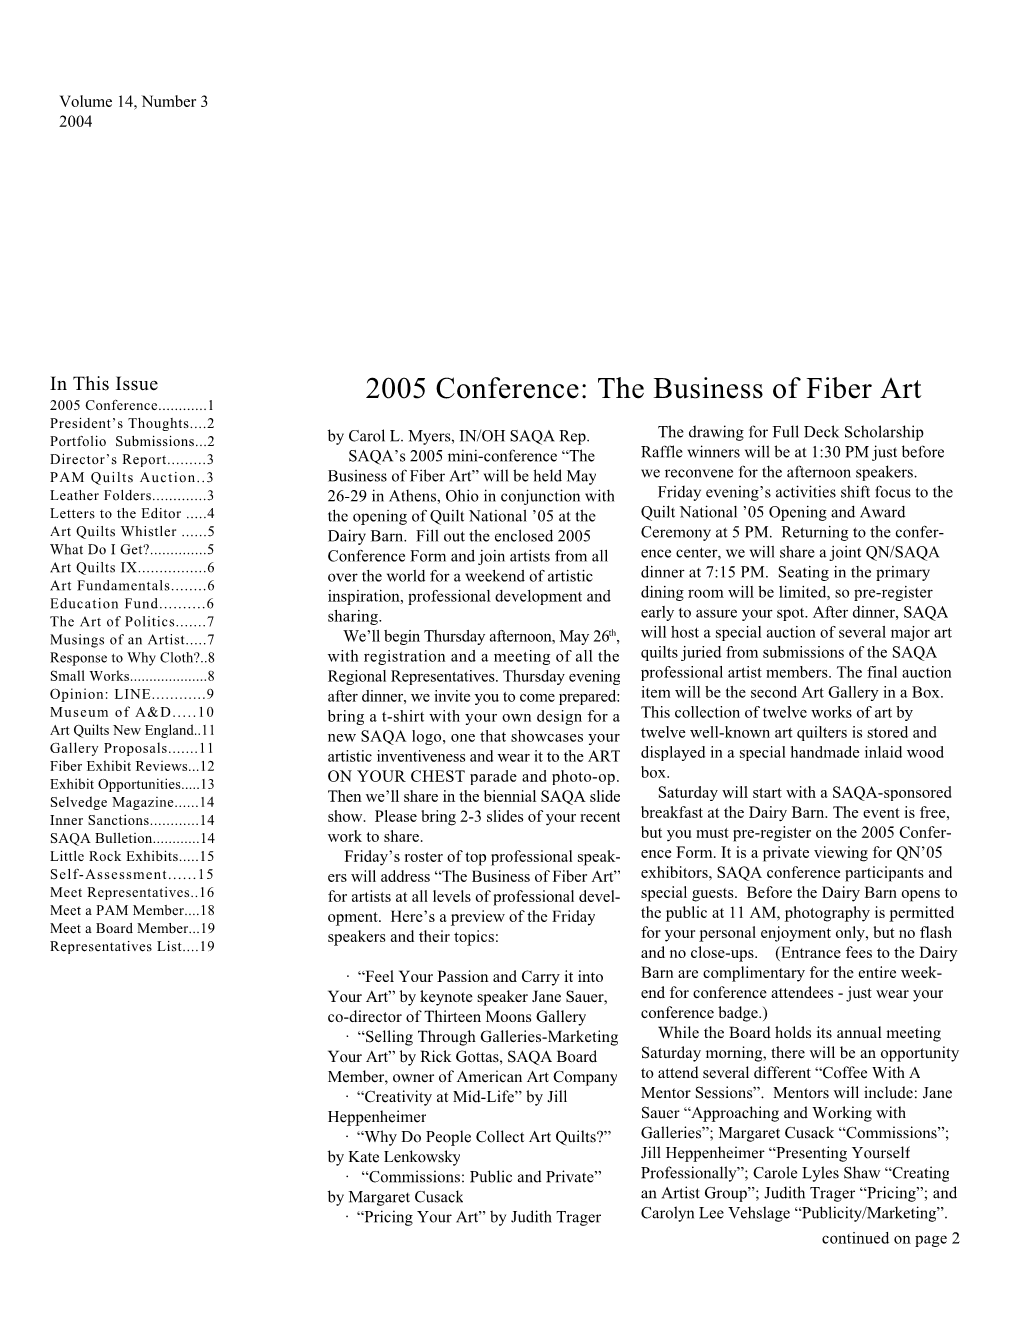 2005 Conference: the Business of Fiber Art 2005 Conference